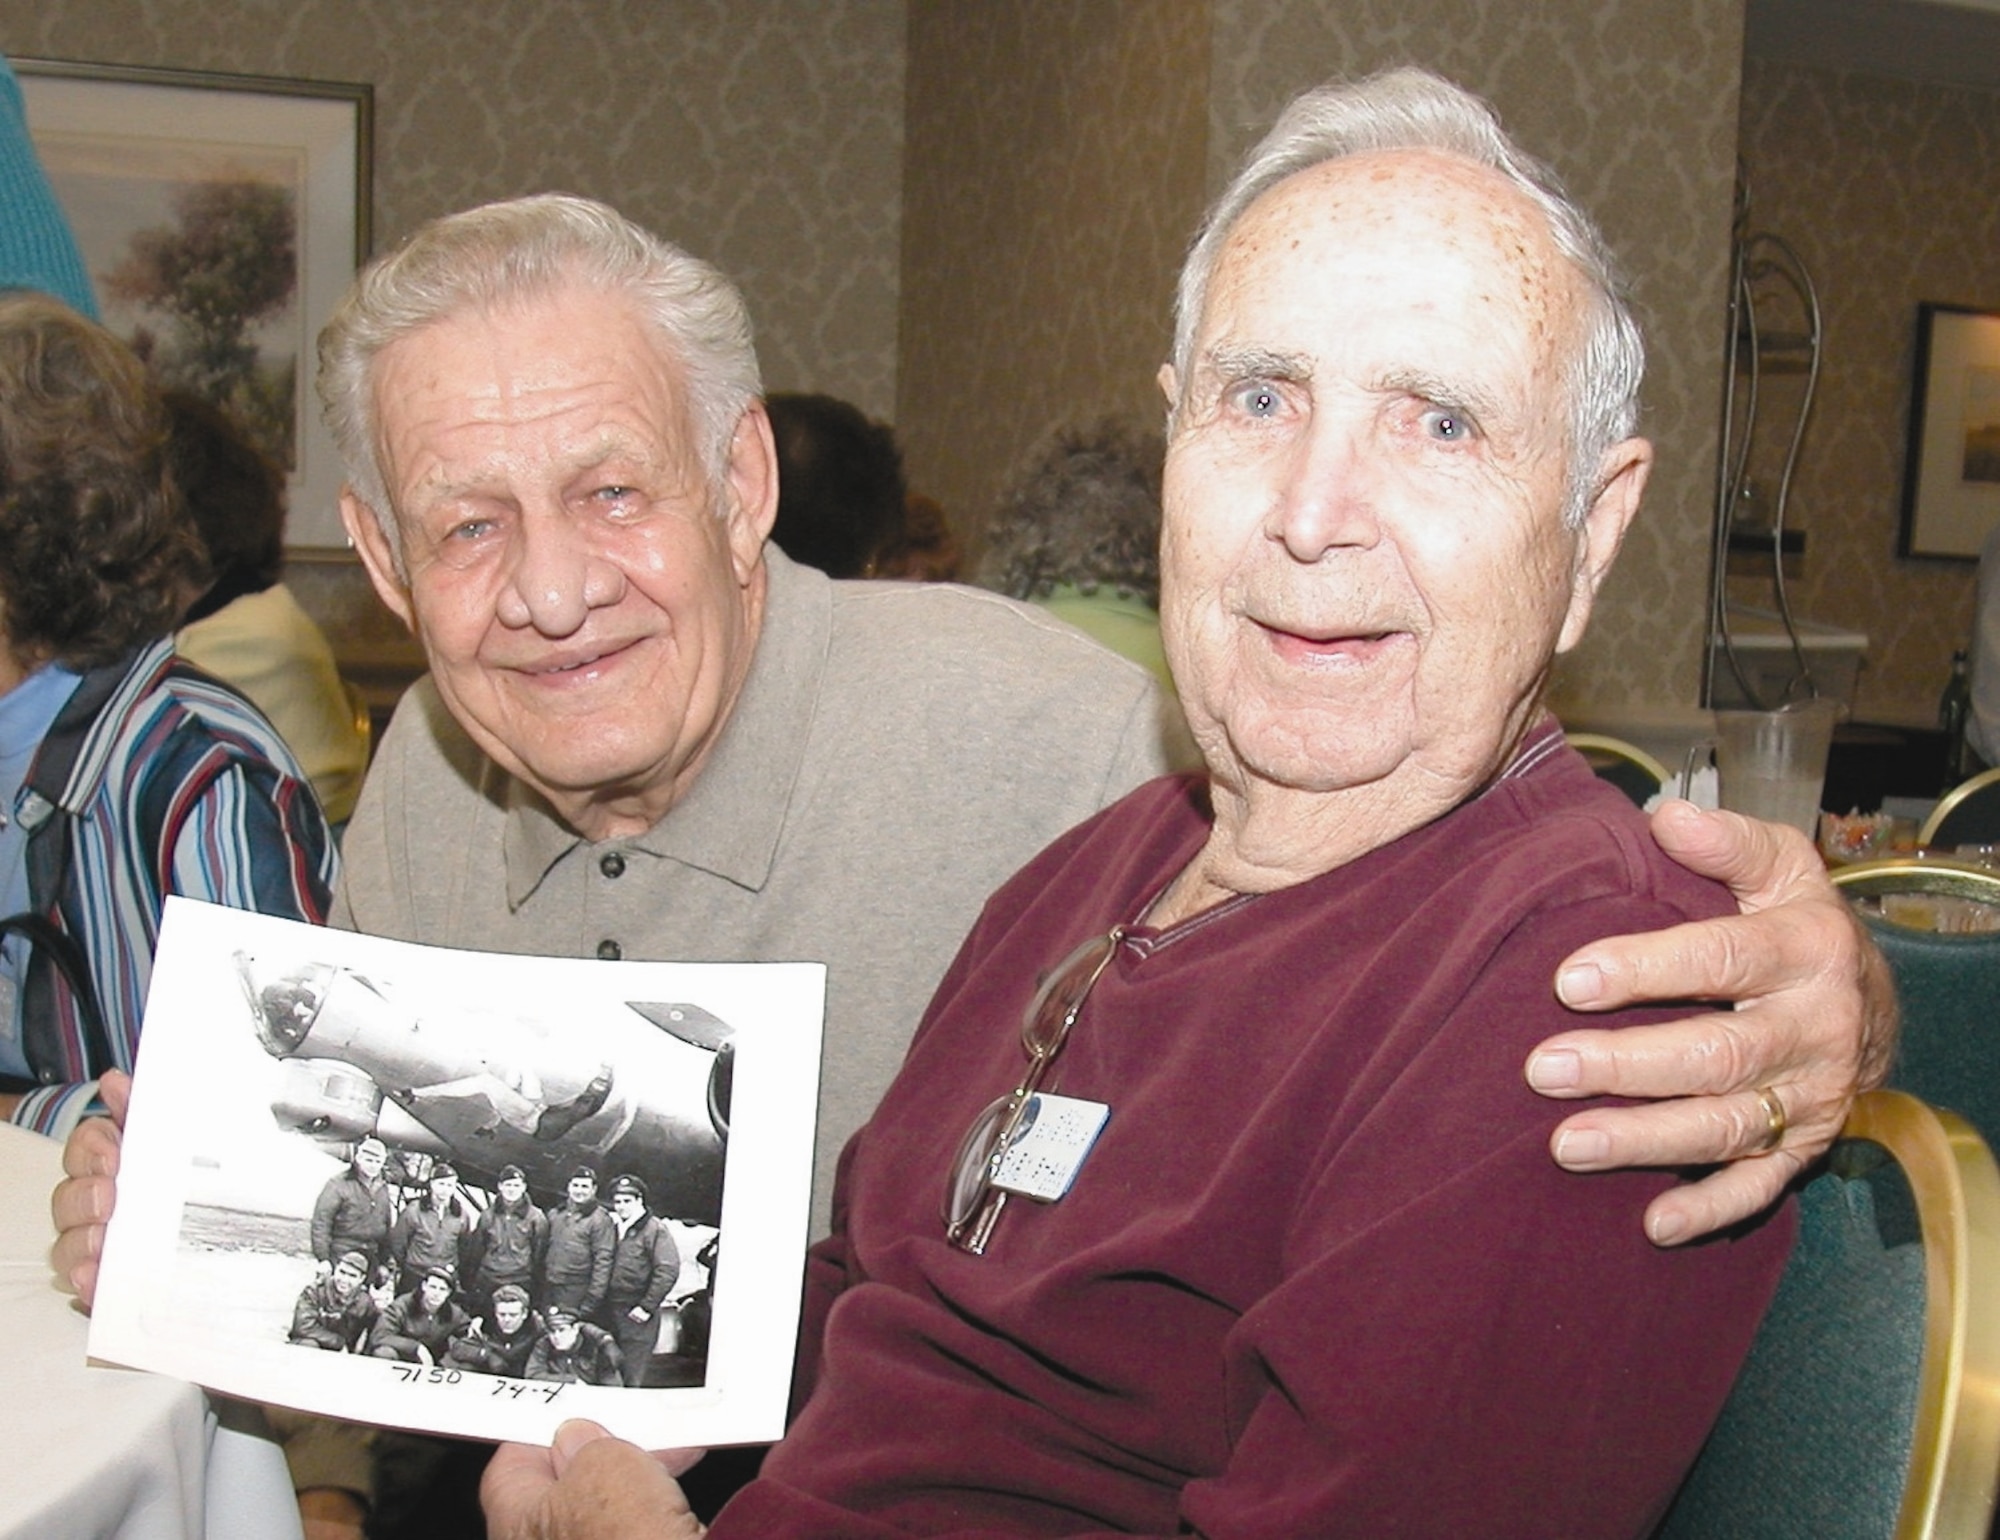 Technical Sgt. Ed Hinrichs, left, and Staff Sgt. Harvey A. Shaw share memories of their time as B-17 Flying Fortress gunners at a 452nd Bomb Group Association reunion. (U.S. Air Force photo by Senior Master Sgt. Matt Proietti)